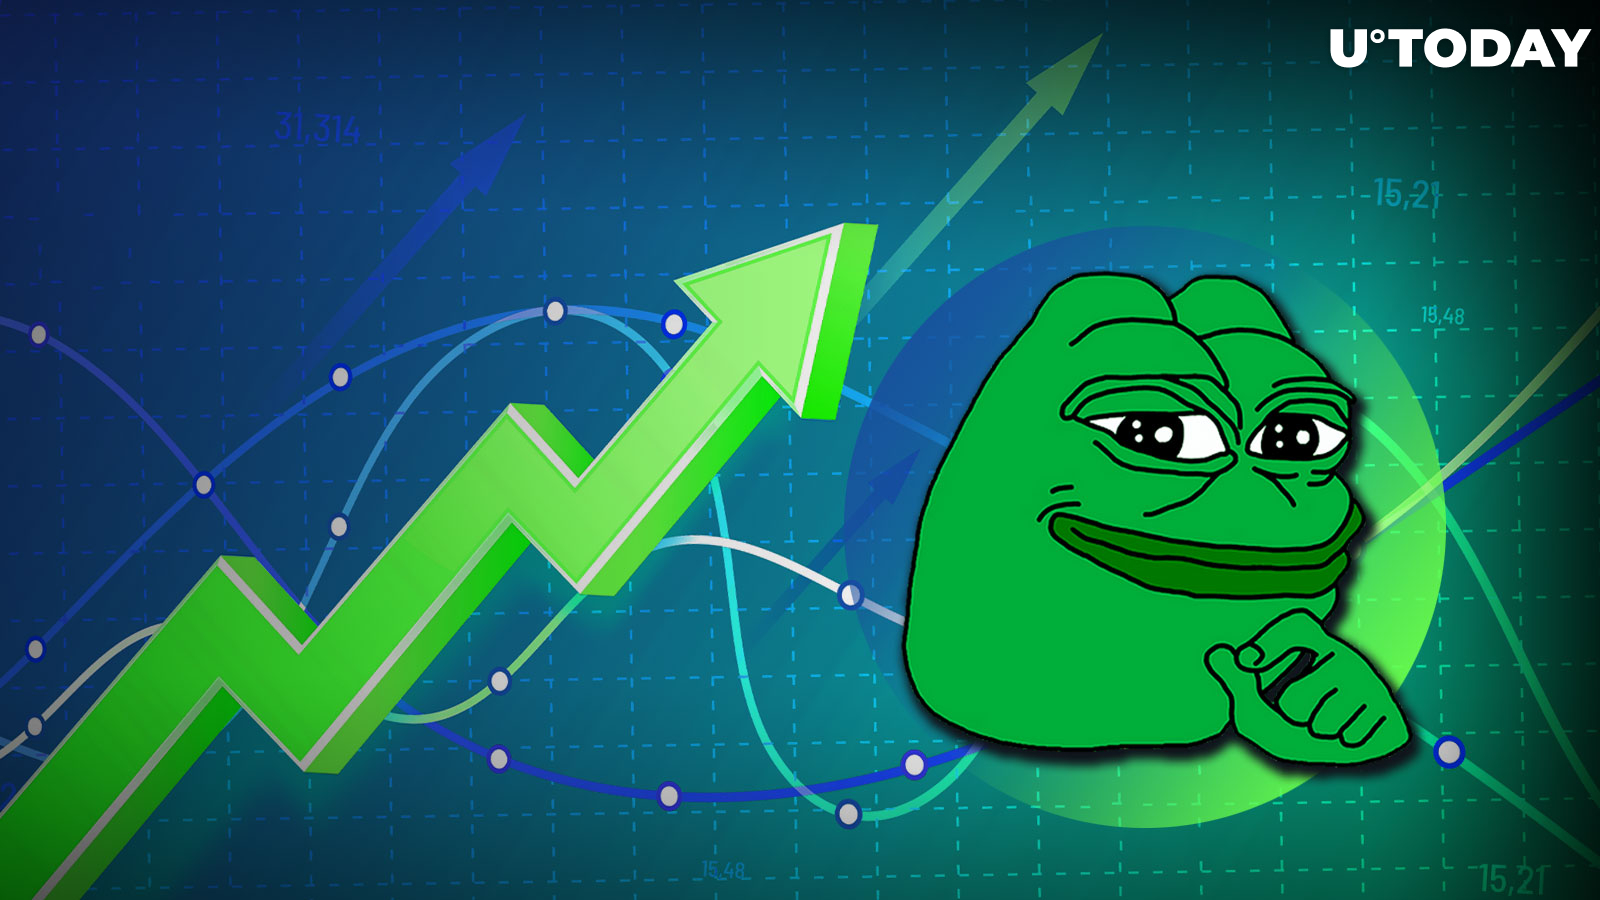 Pepe (PEPE) Overtakes Dogecoin (DOGE) in Trading Volume